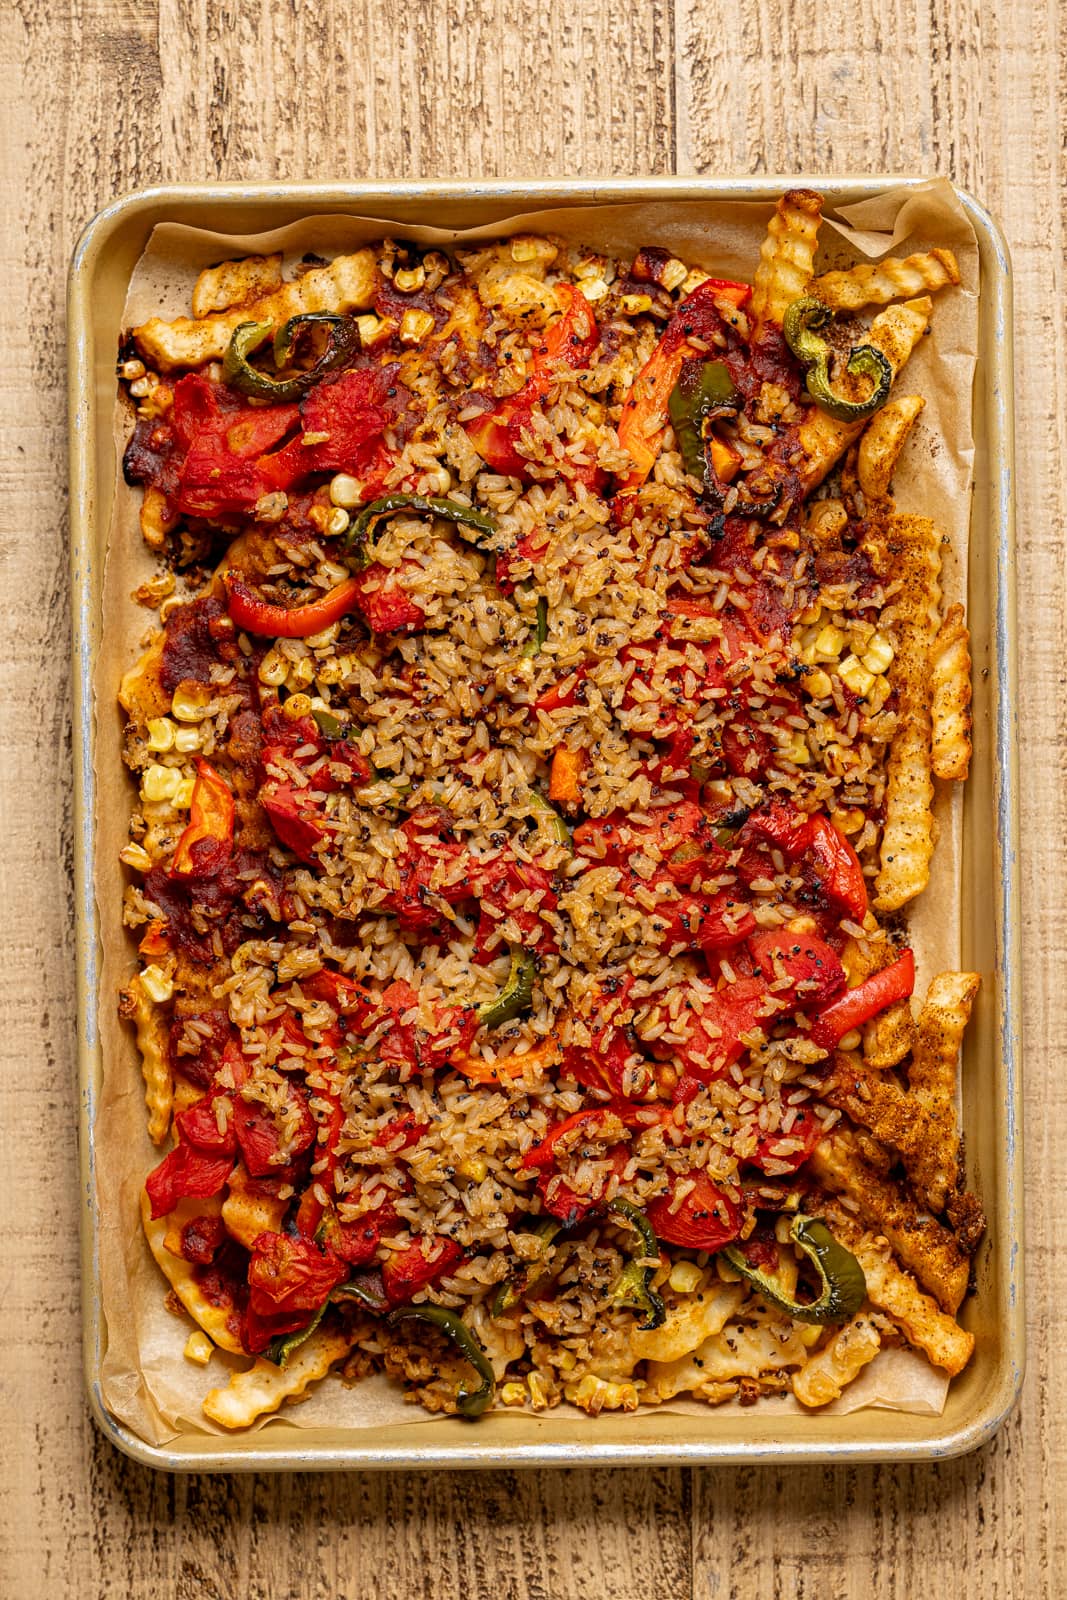 Fries on sheet pan with all toppings including seasonings.